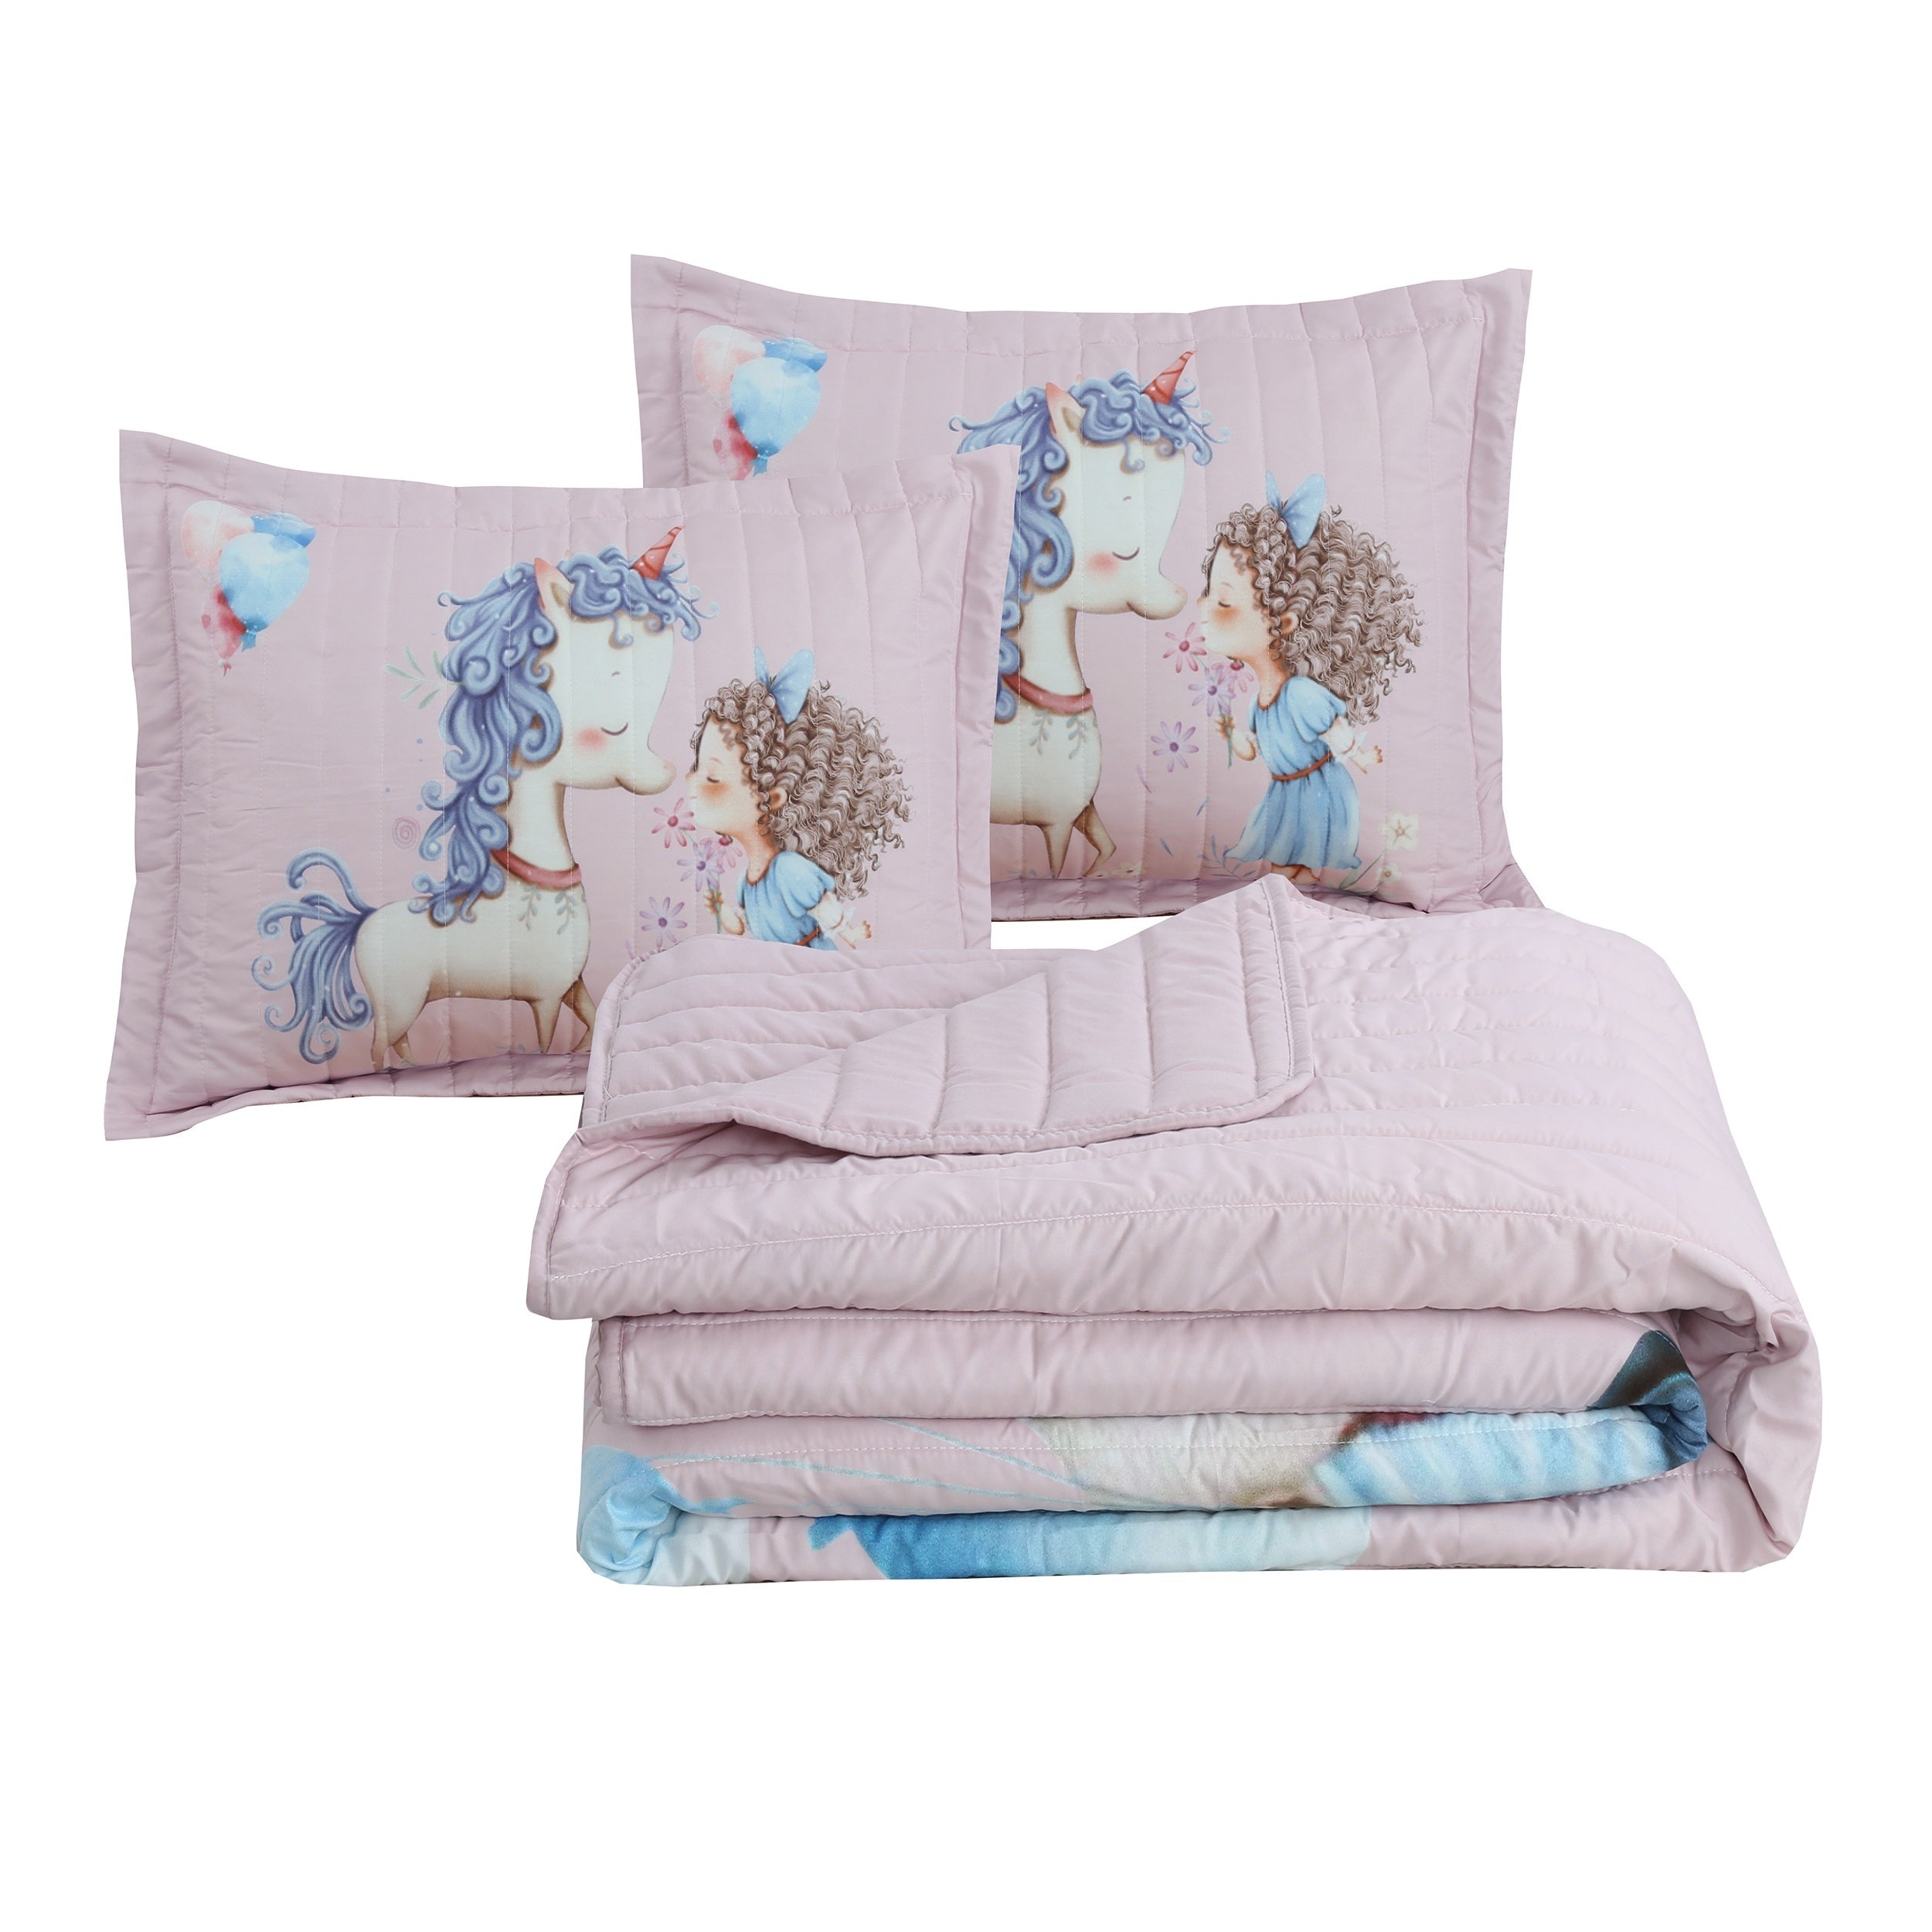 3pcs Soft and Comfortable Unicorn Quilt Set for Kids - Perfect for All Seasons - Machine Washable - Includes 1 Quilt and 2 Pillowcases (Core Not Included)